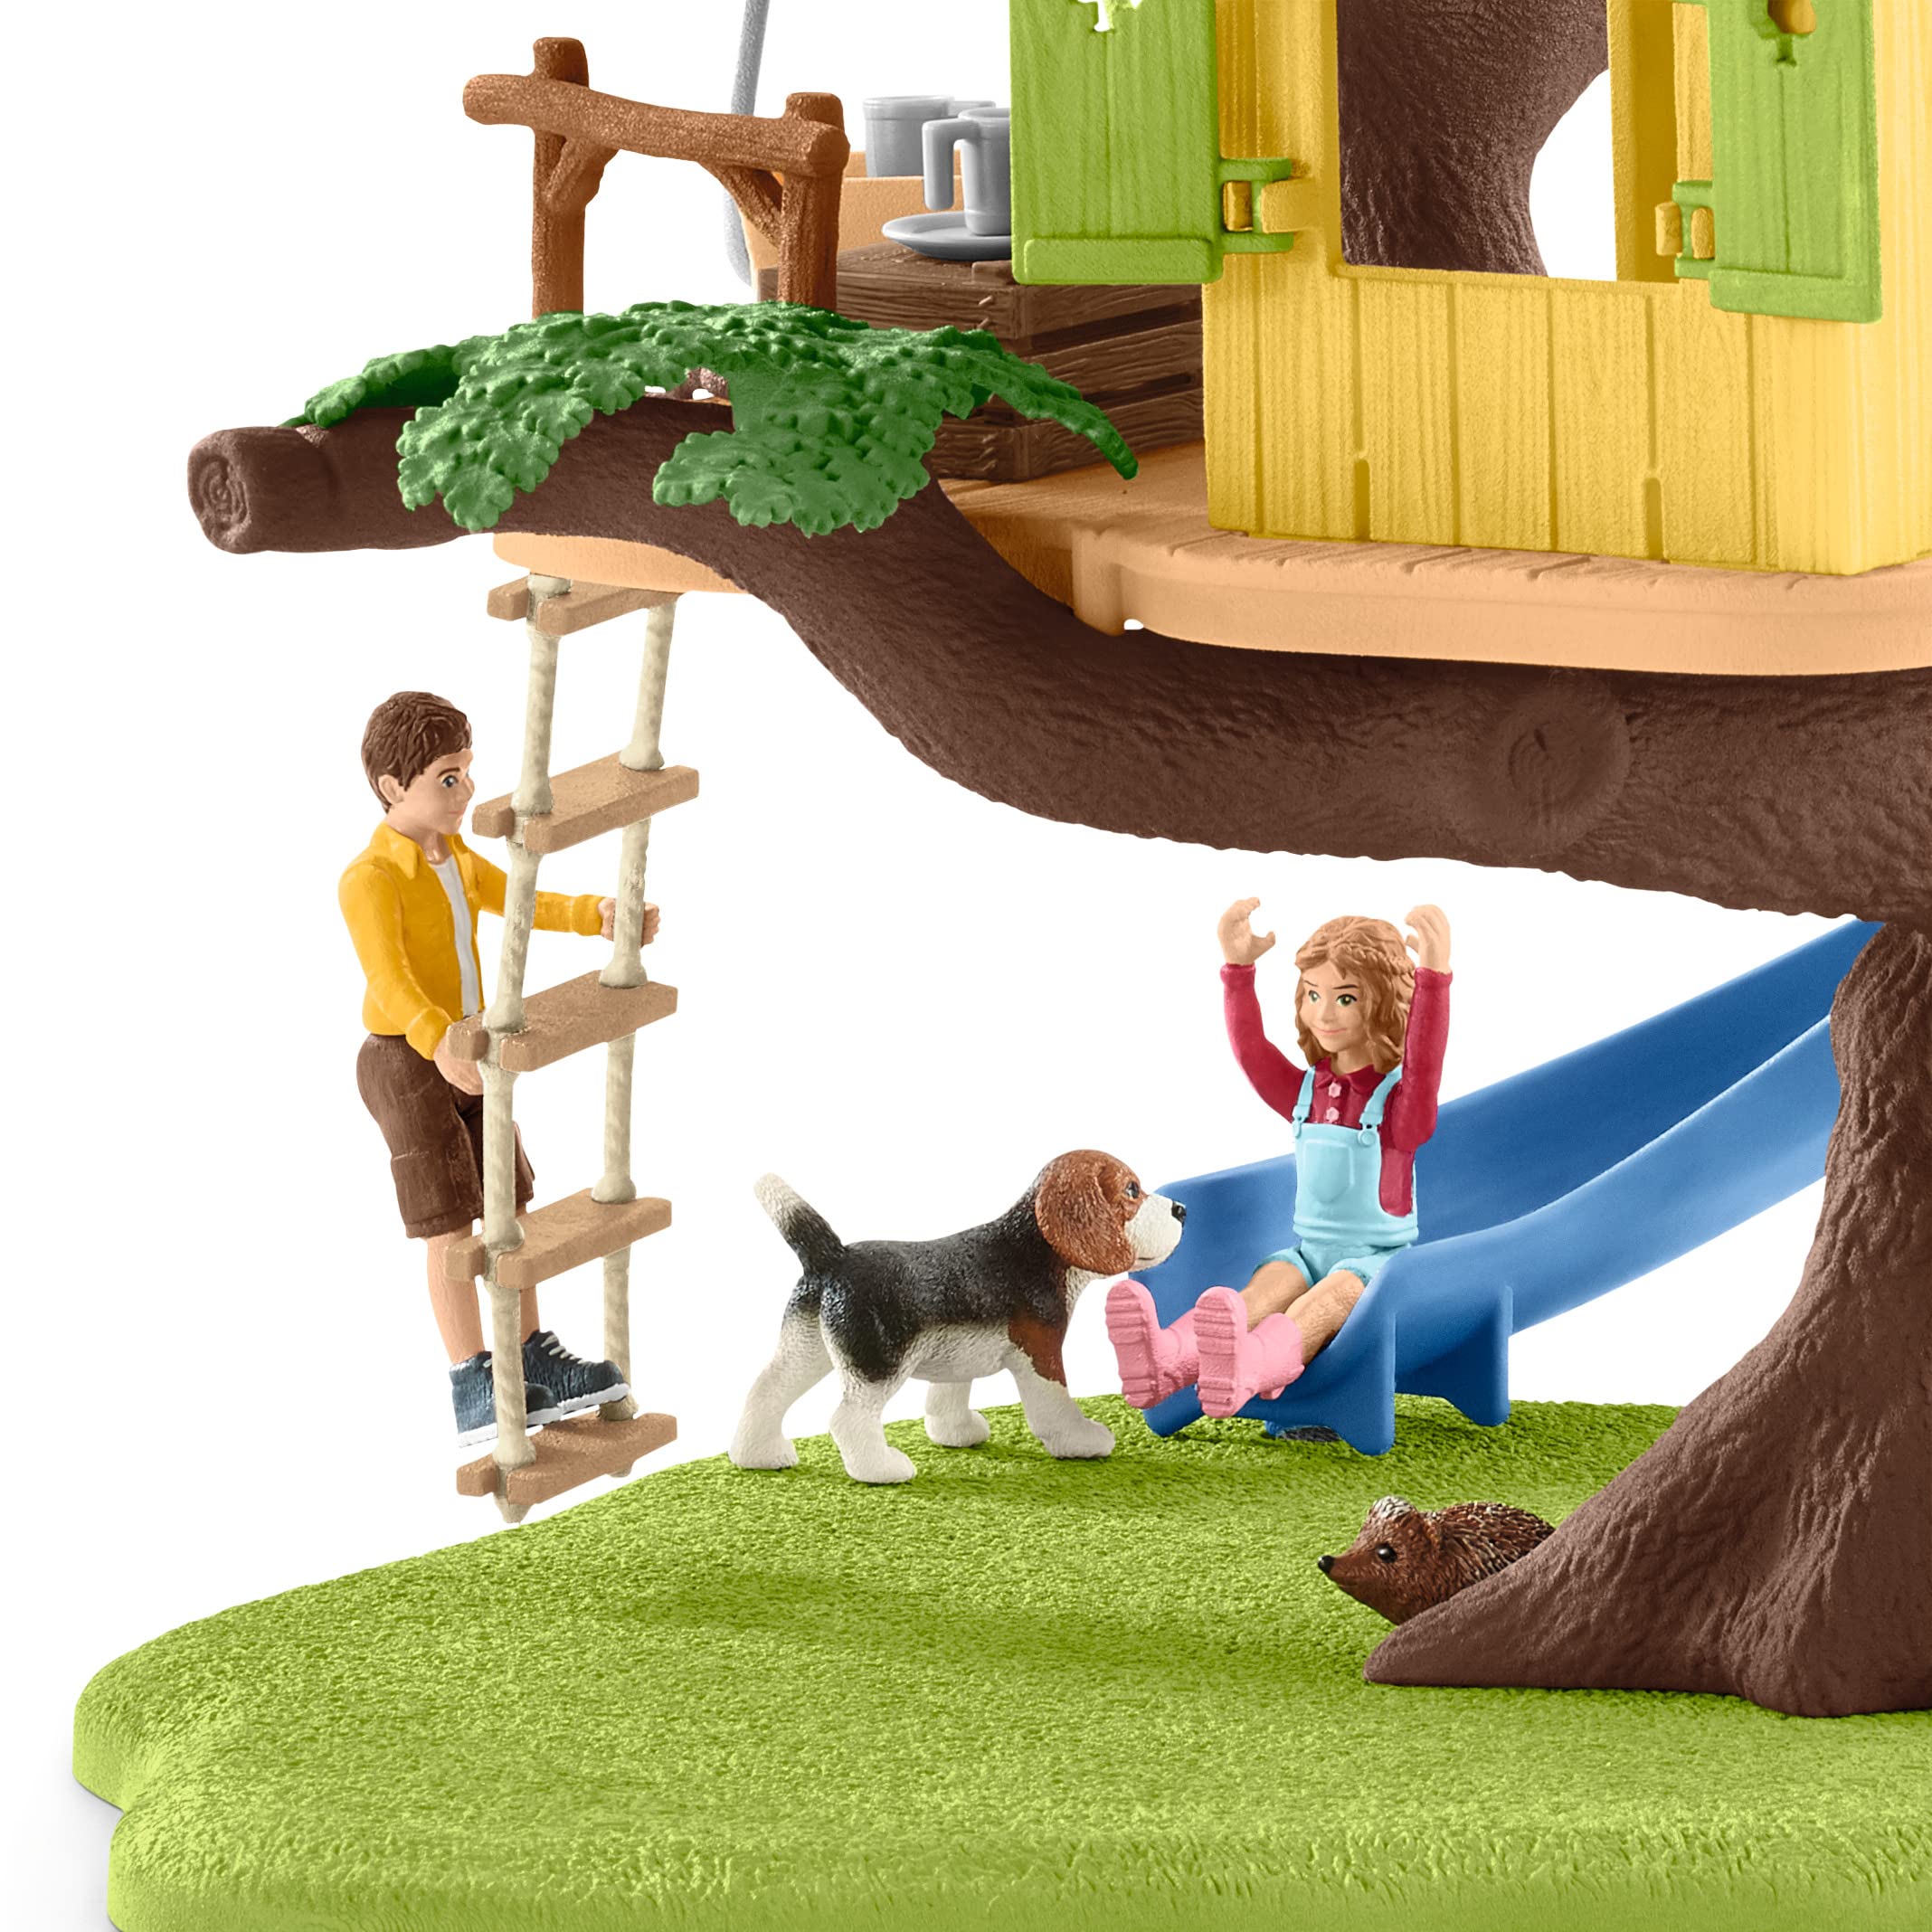 Schleich Farm World, Farm Animal Gifts for Kids, Adventure Tree House with Animal Figurines and Accessories 28-Piece Set, Ages 3+